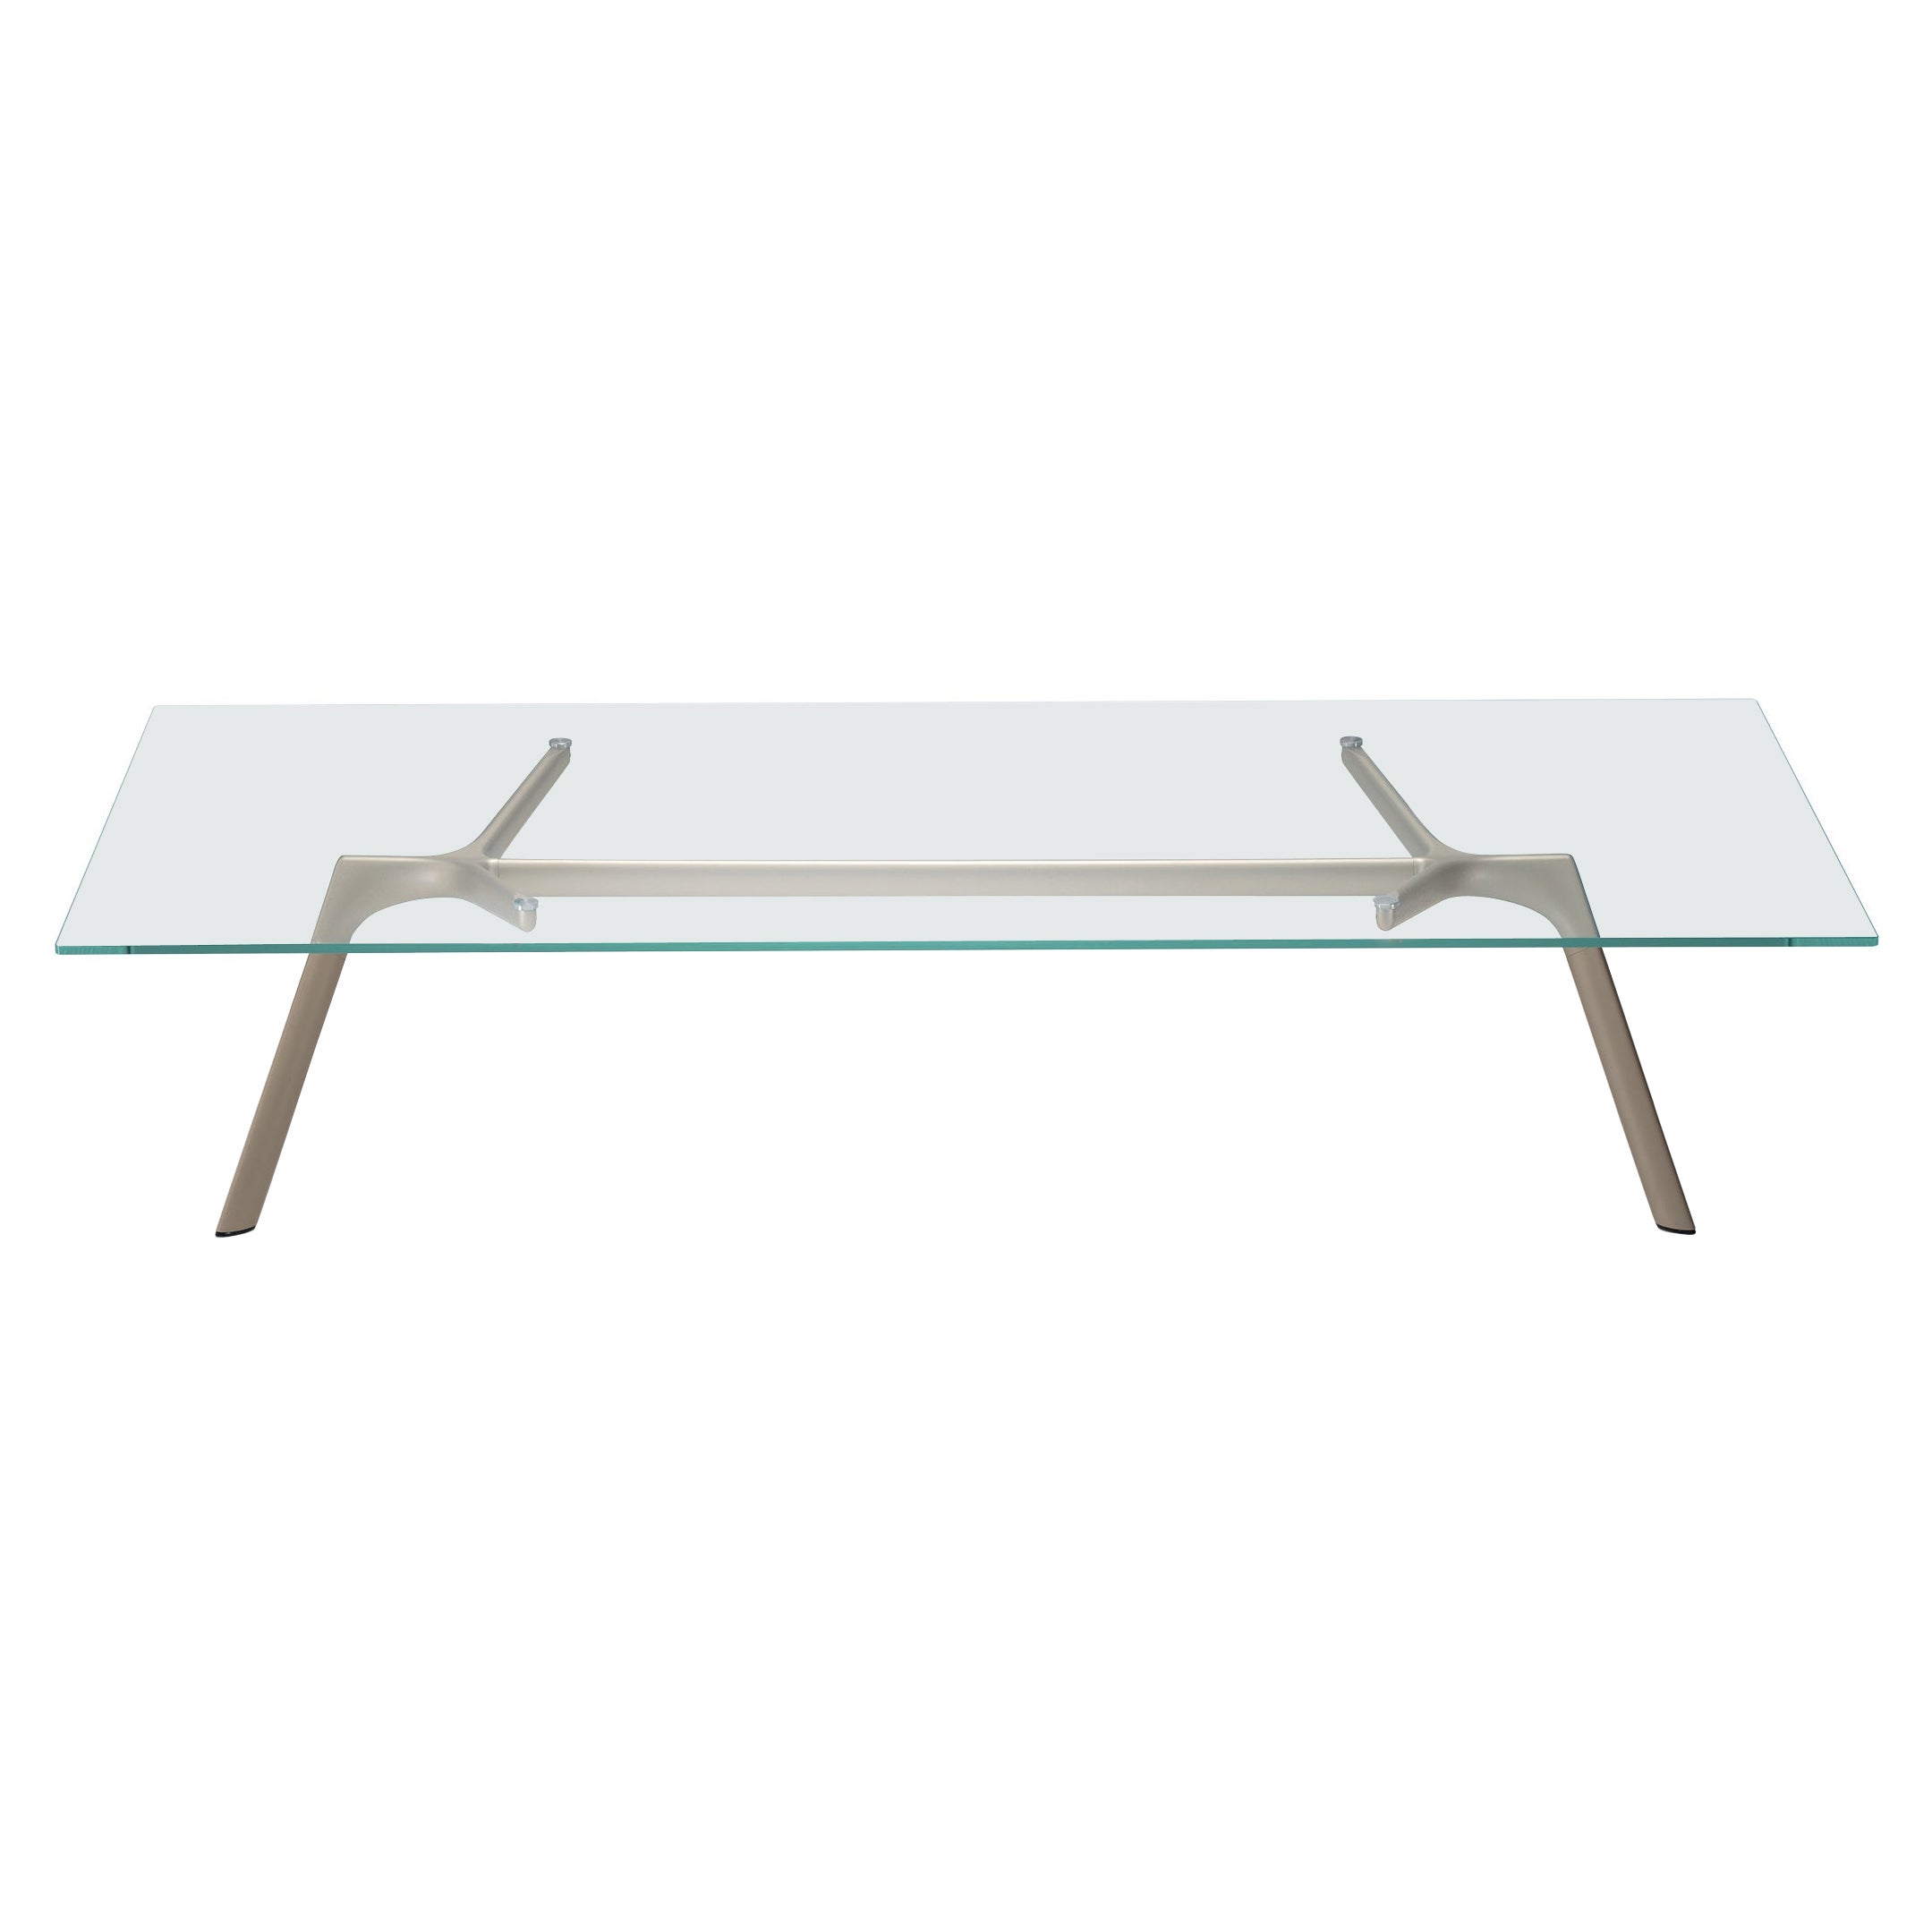 Alias Medium Dry XS 45B Table in Glass Top with Anodised Gold Metallic Frame For Sale